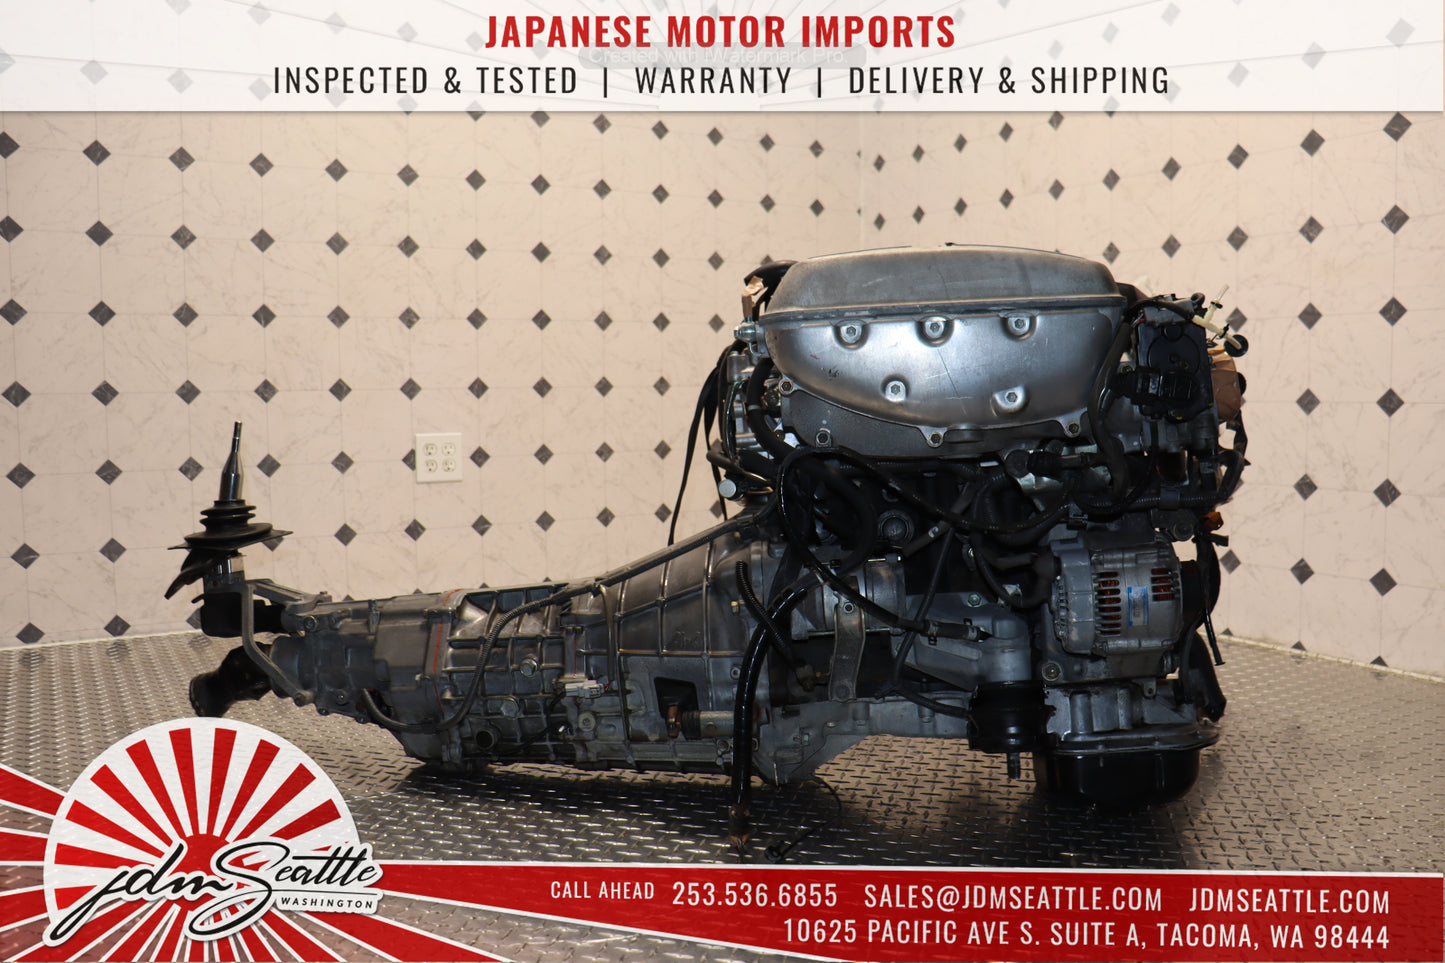 JDM 3SGE BEAMS TOYOTA ALTEZZA IS300 VVTI ENGINE WITH 6 SPEED TRANSMISSION